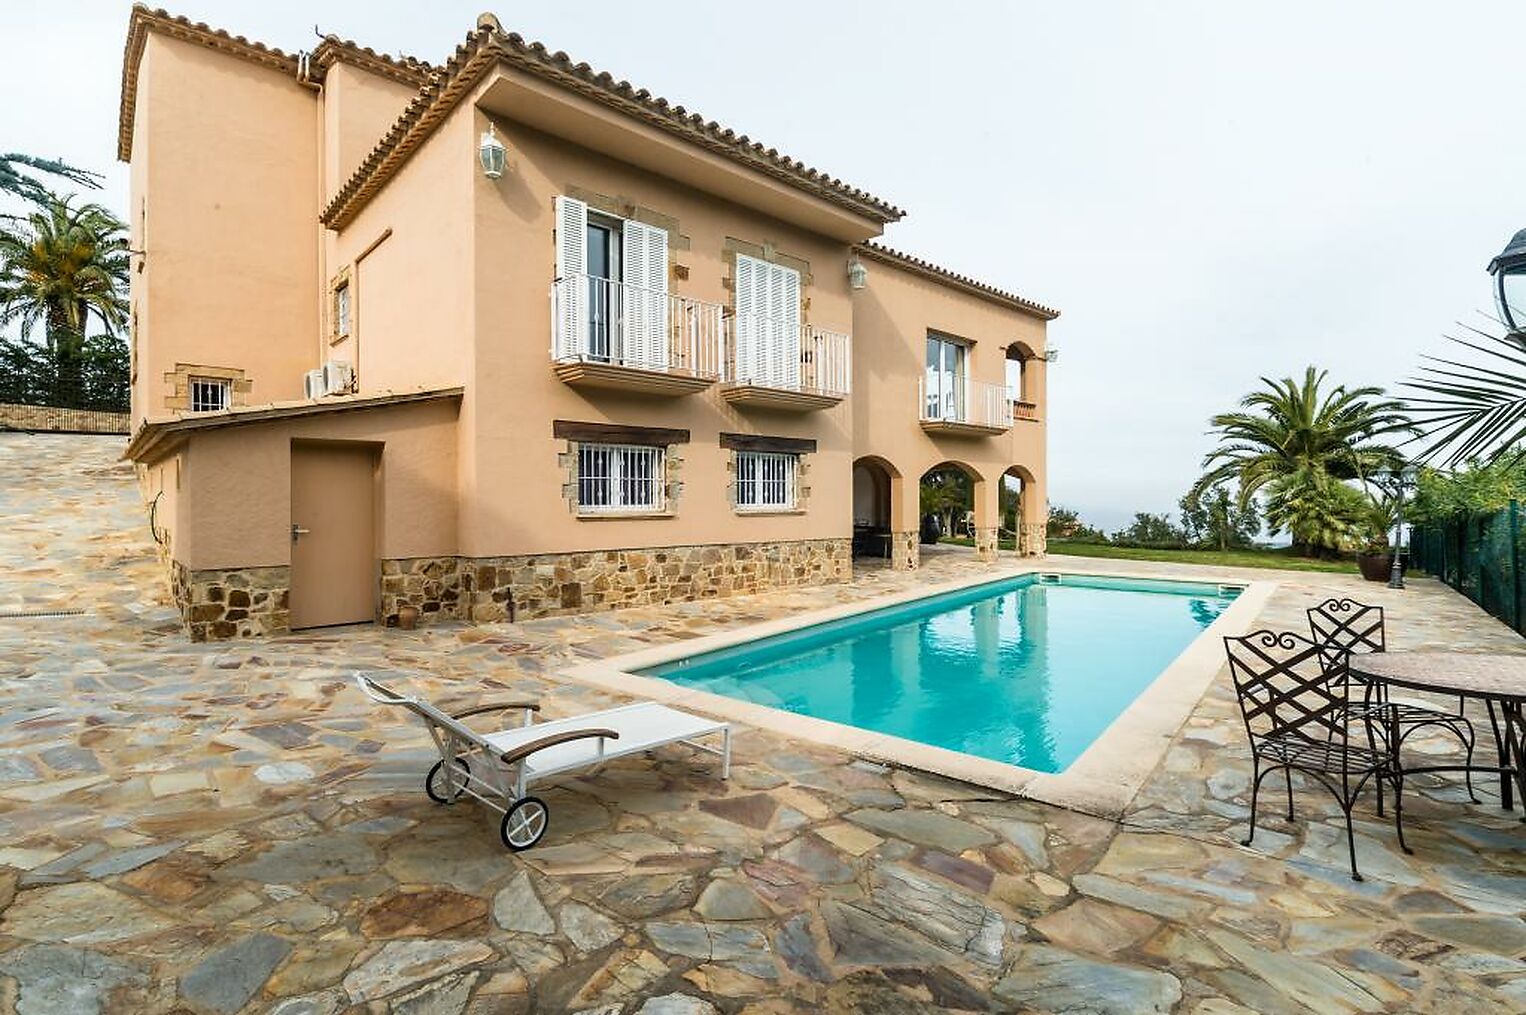 This large Villa is located in the exclusive area of Mas Nou, in Platja d'Aro.